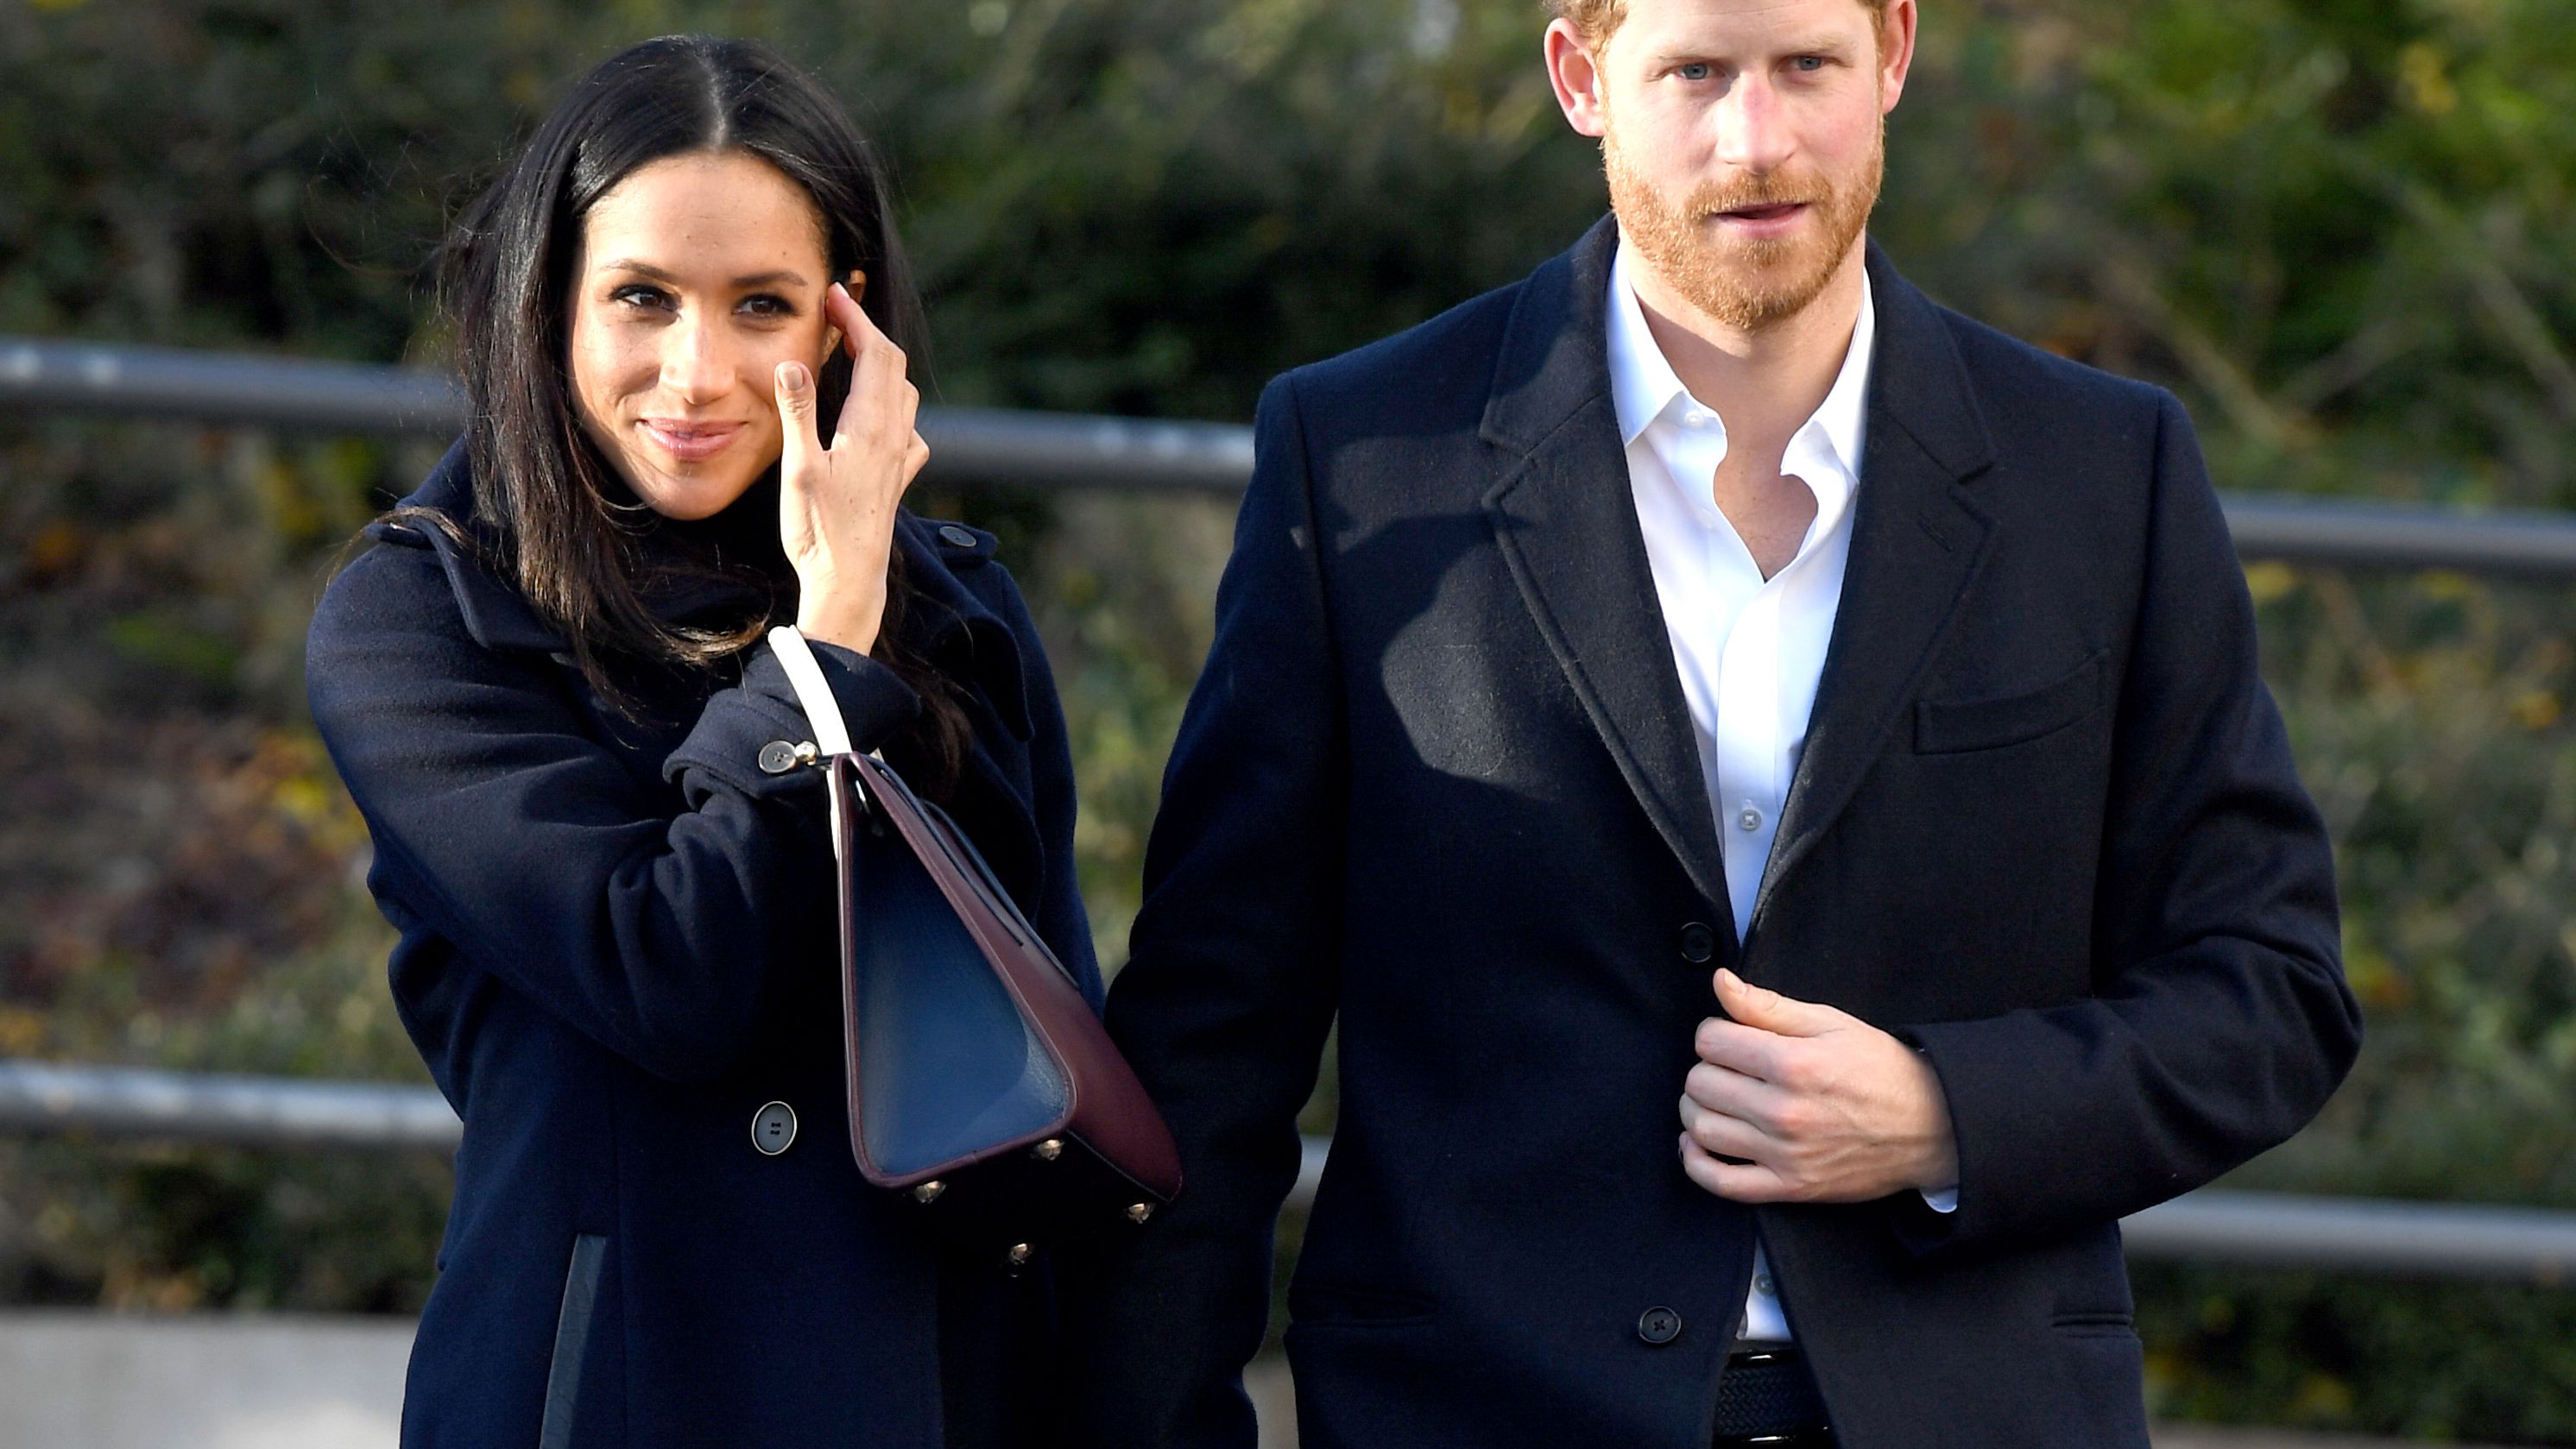 What to know about Strathberry – Meghan Markle's favourite handbag brand